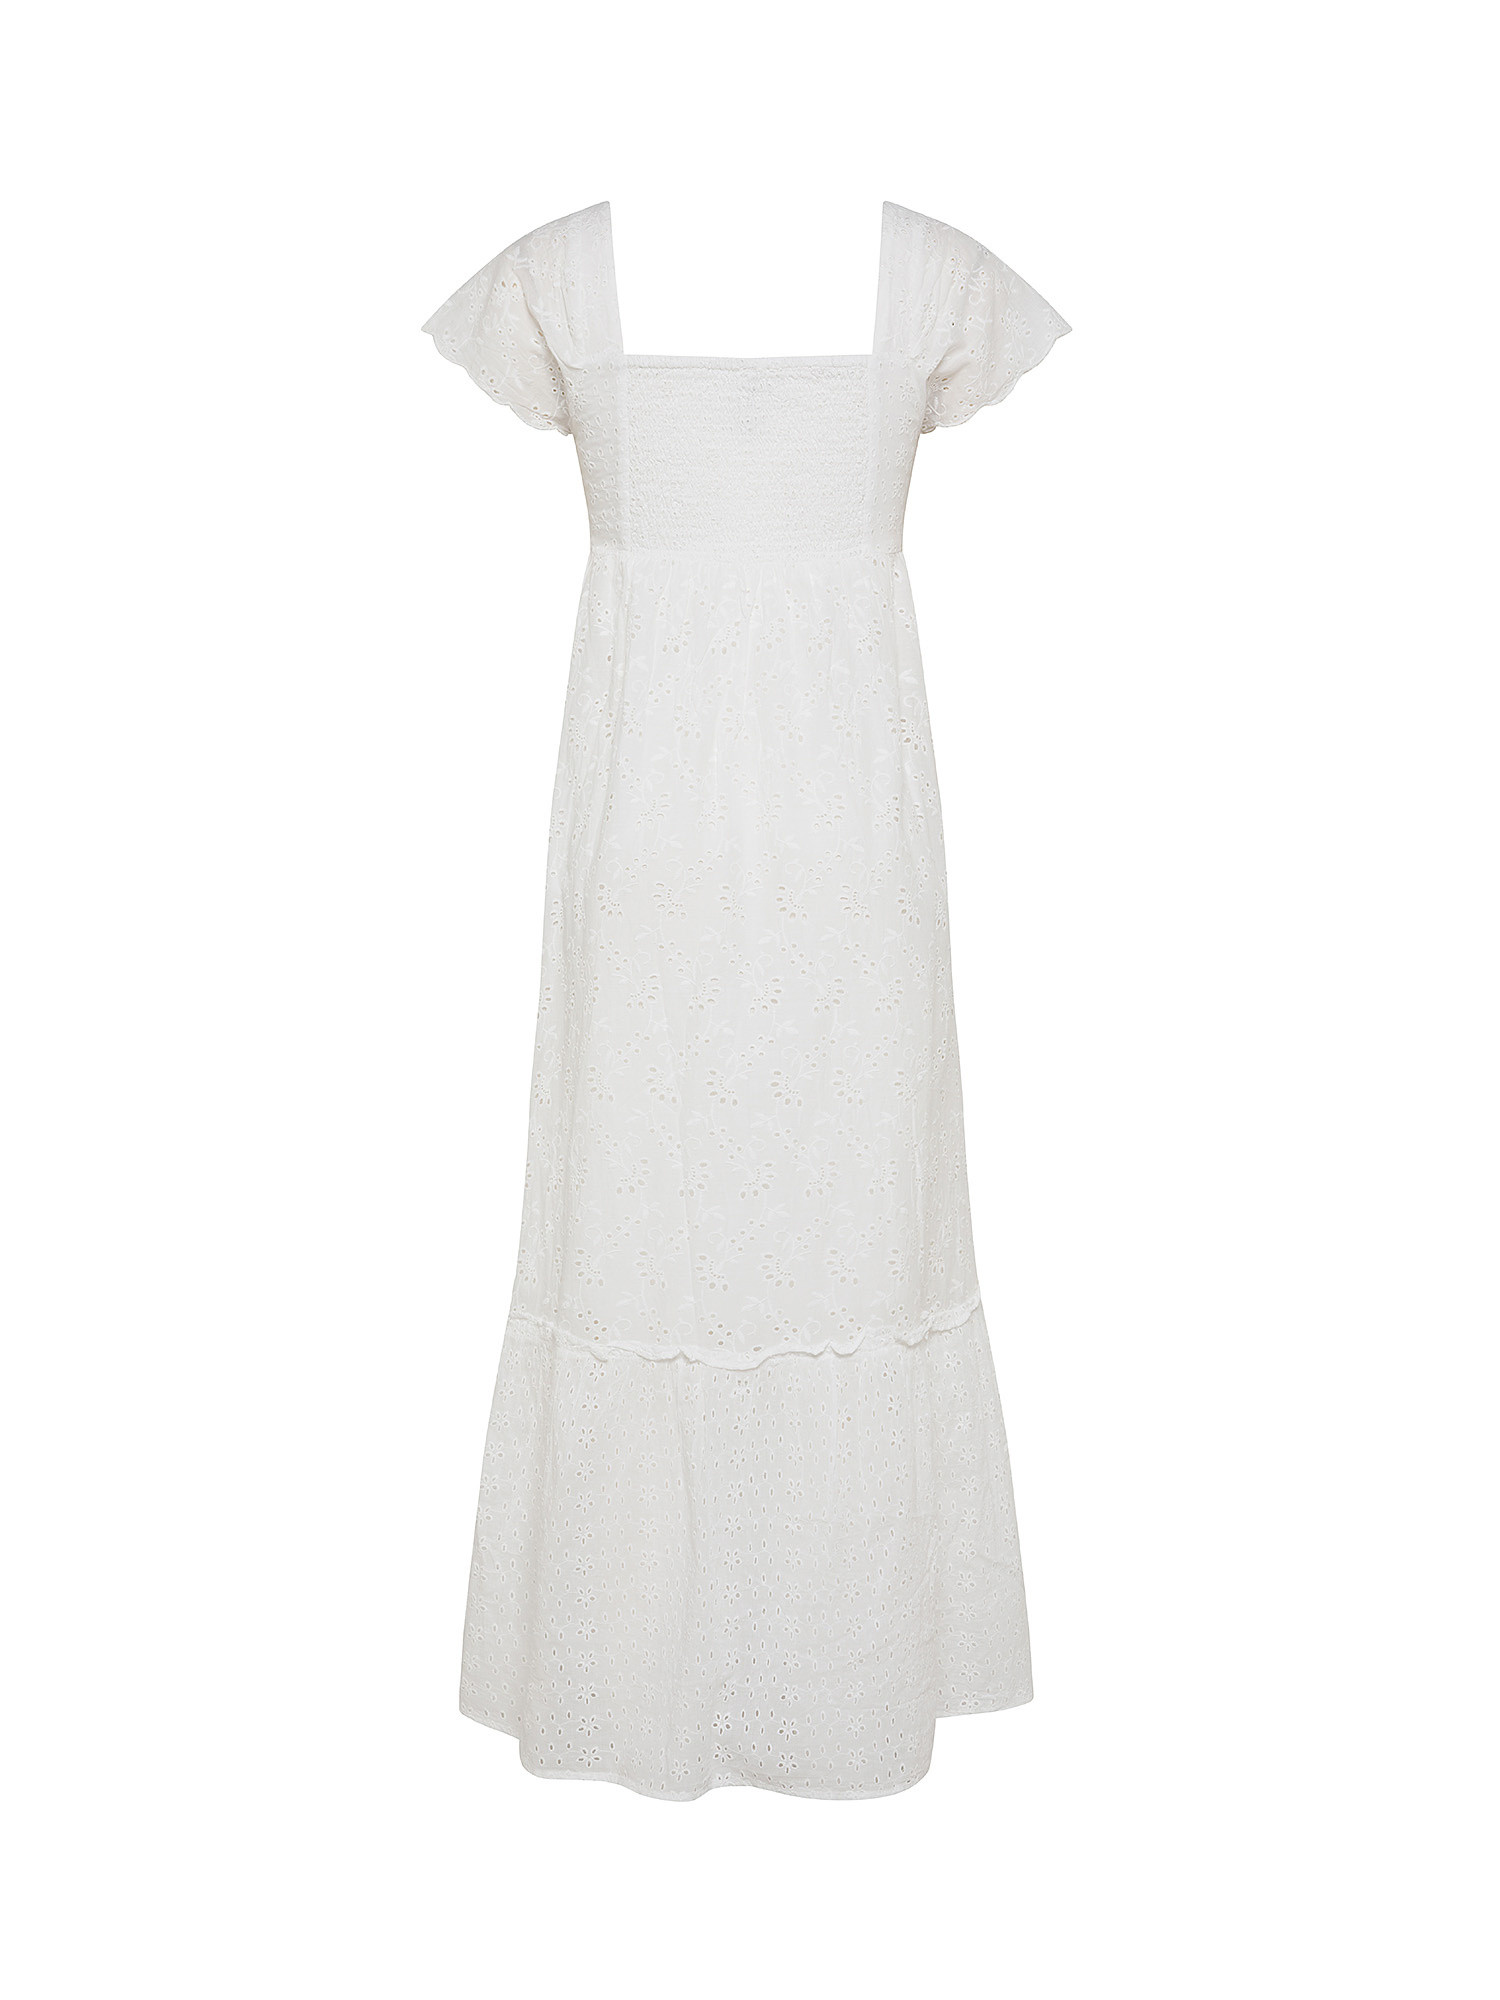 Pepe Jeans - Openwork dress in cotton, White, large image number 1